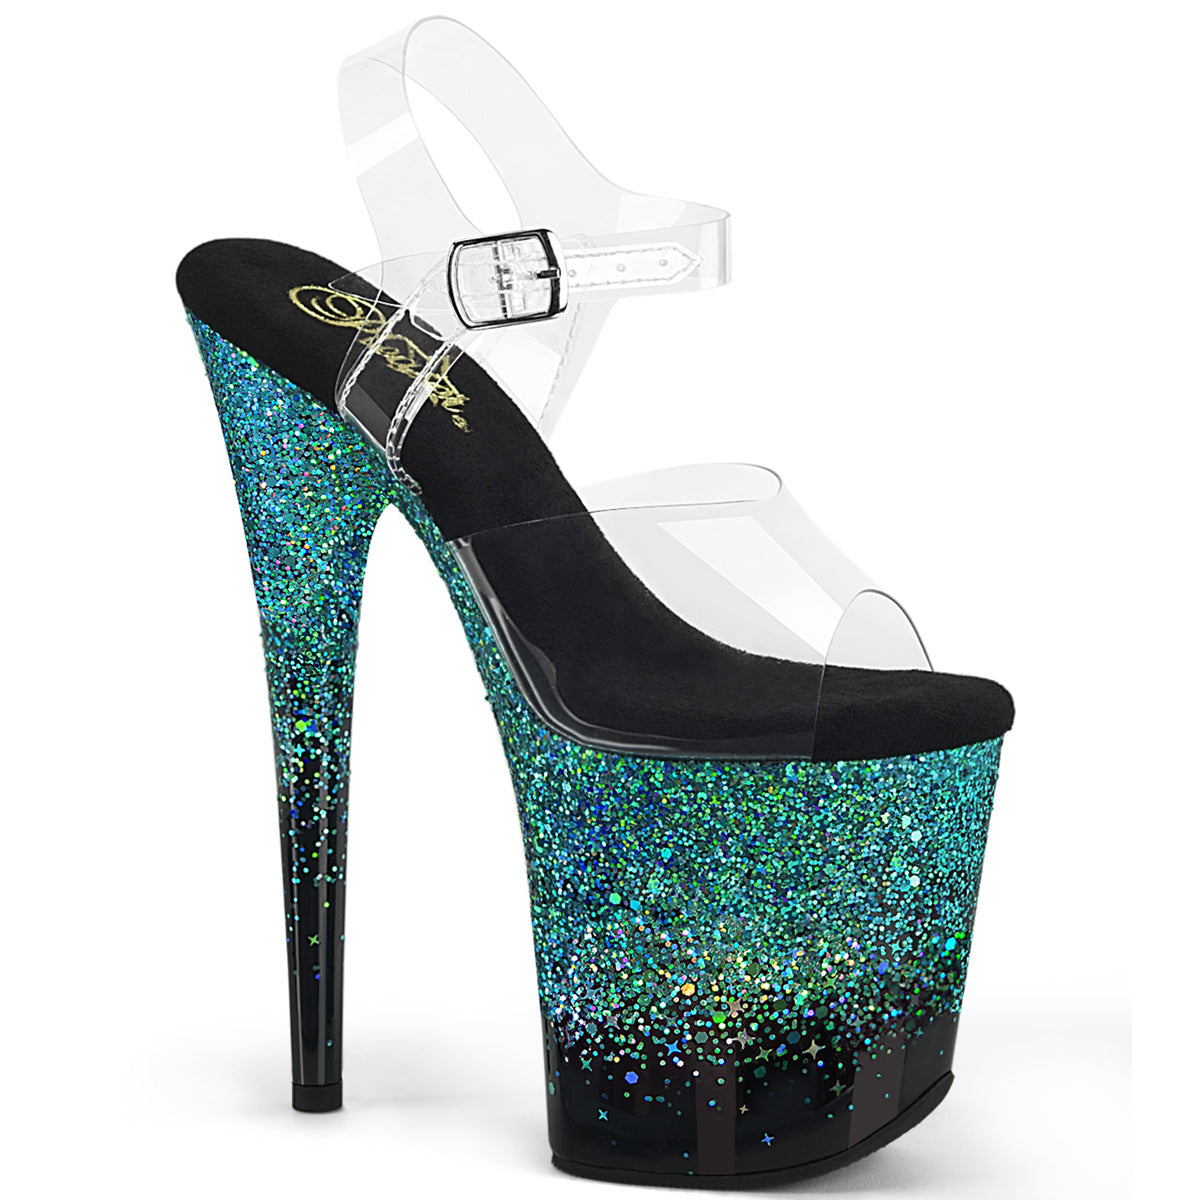 8 Inch Heel FLAMINGO-808SS Clear Turquoise Glitter